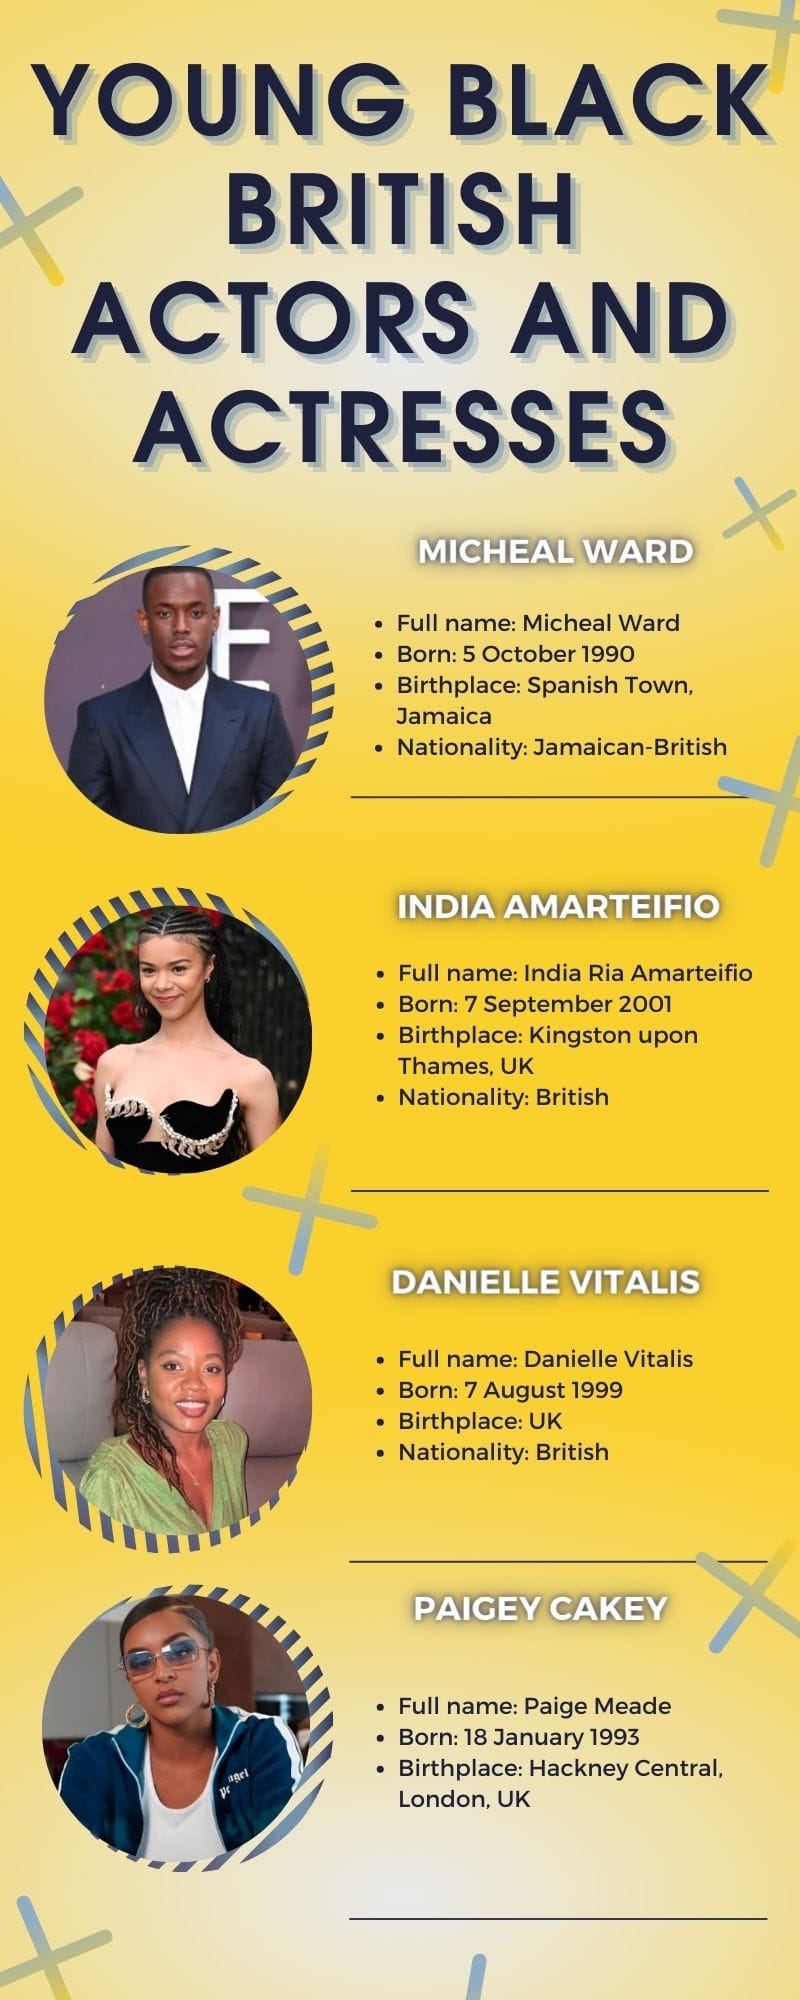 Young black British actors and actresses